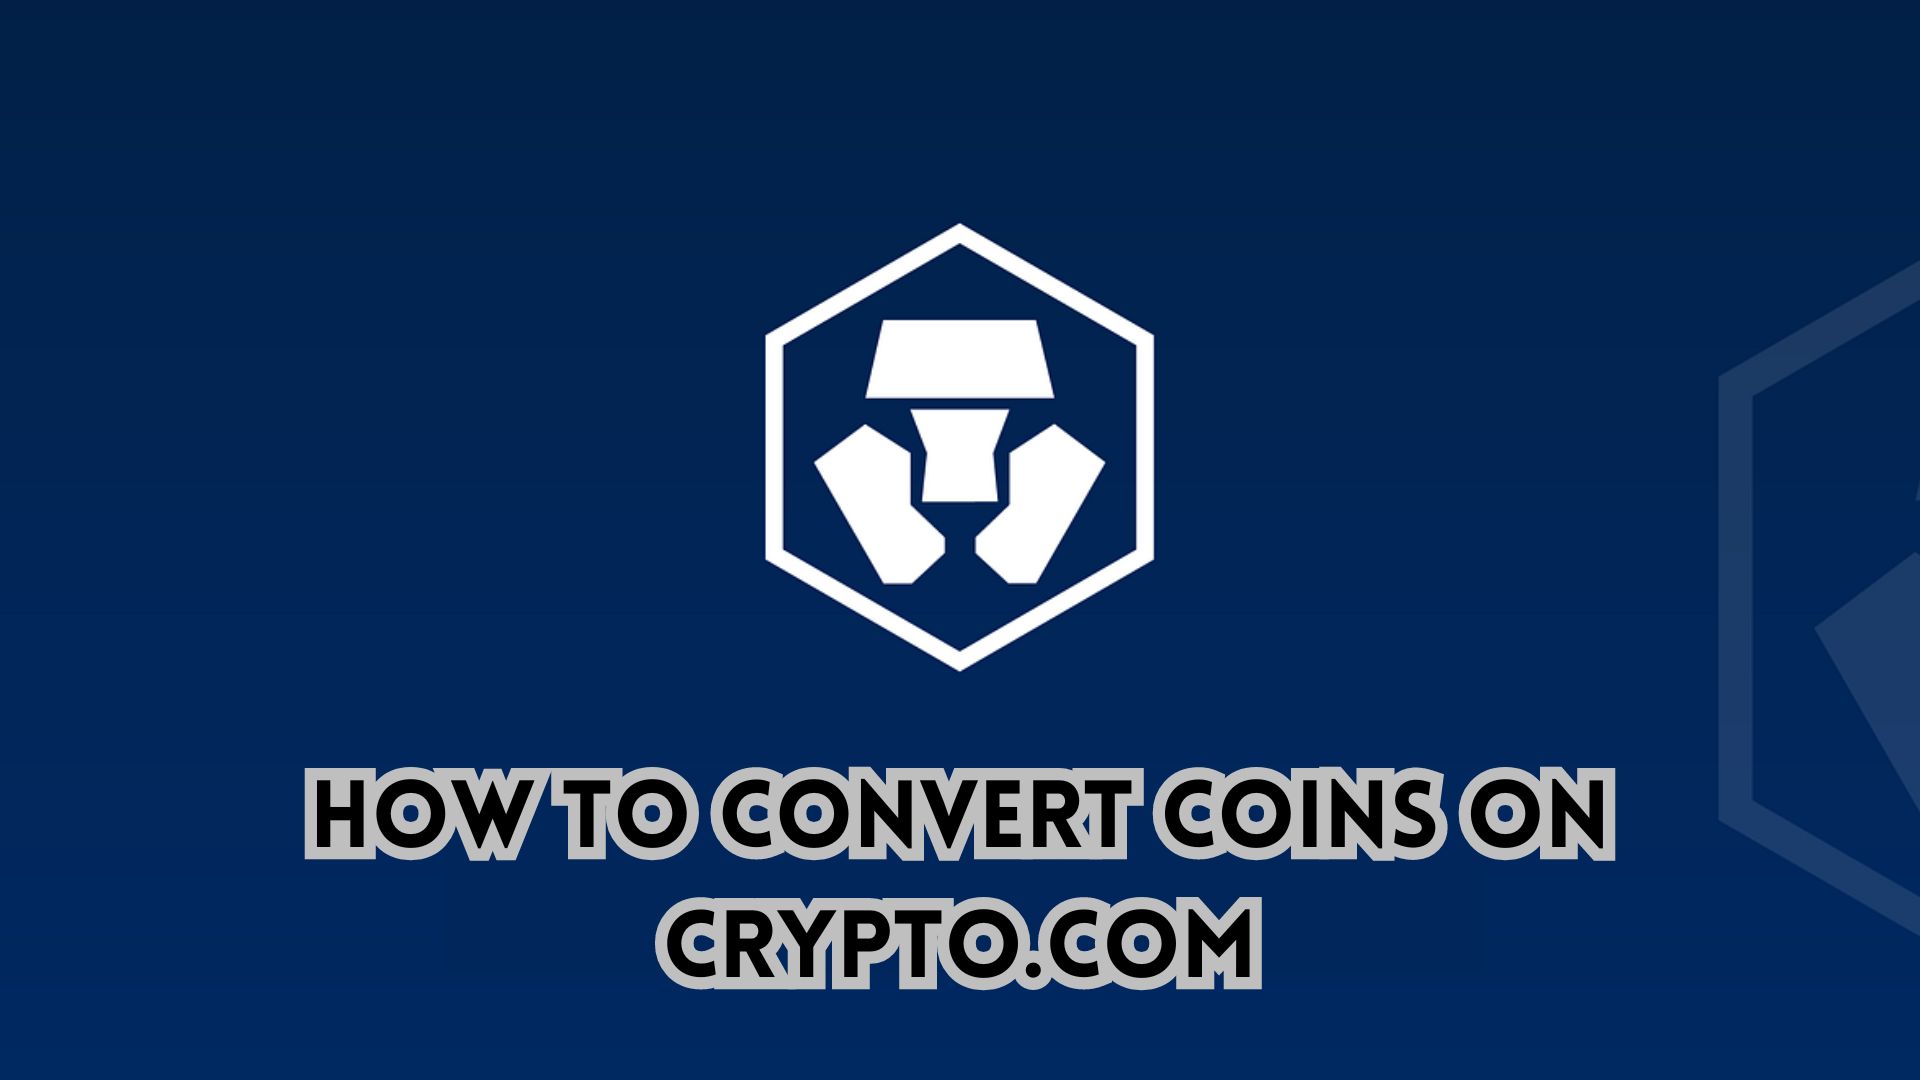 How to Convert Coins on Crypto.com.